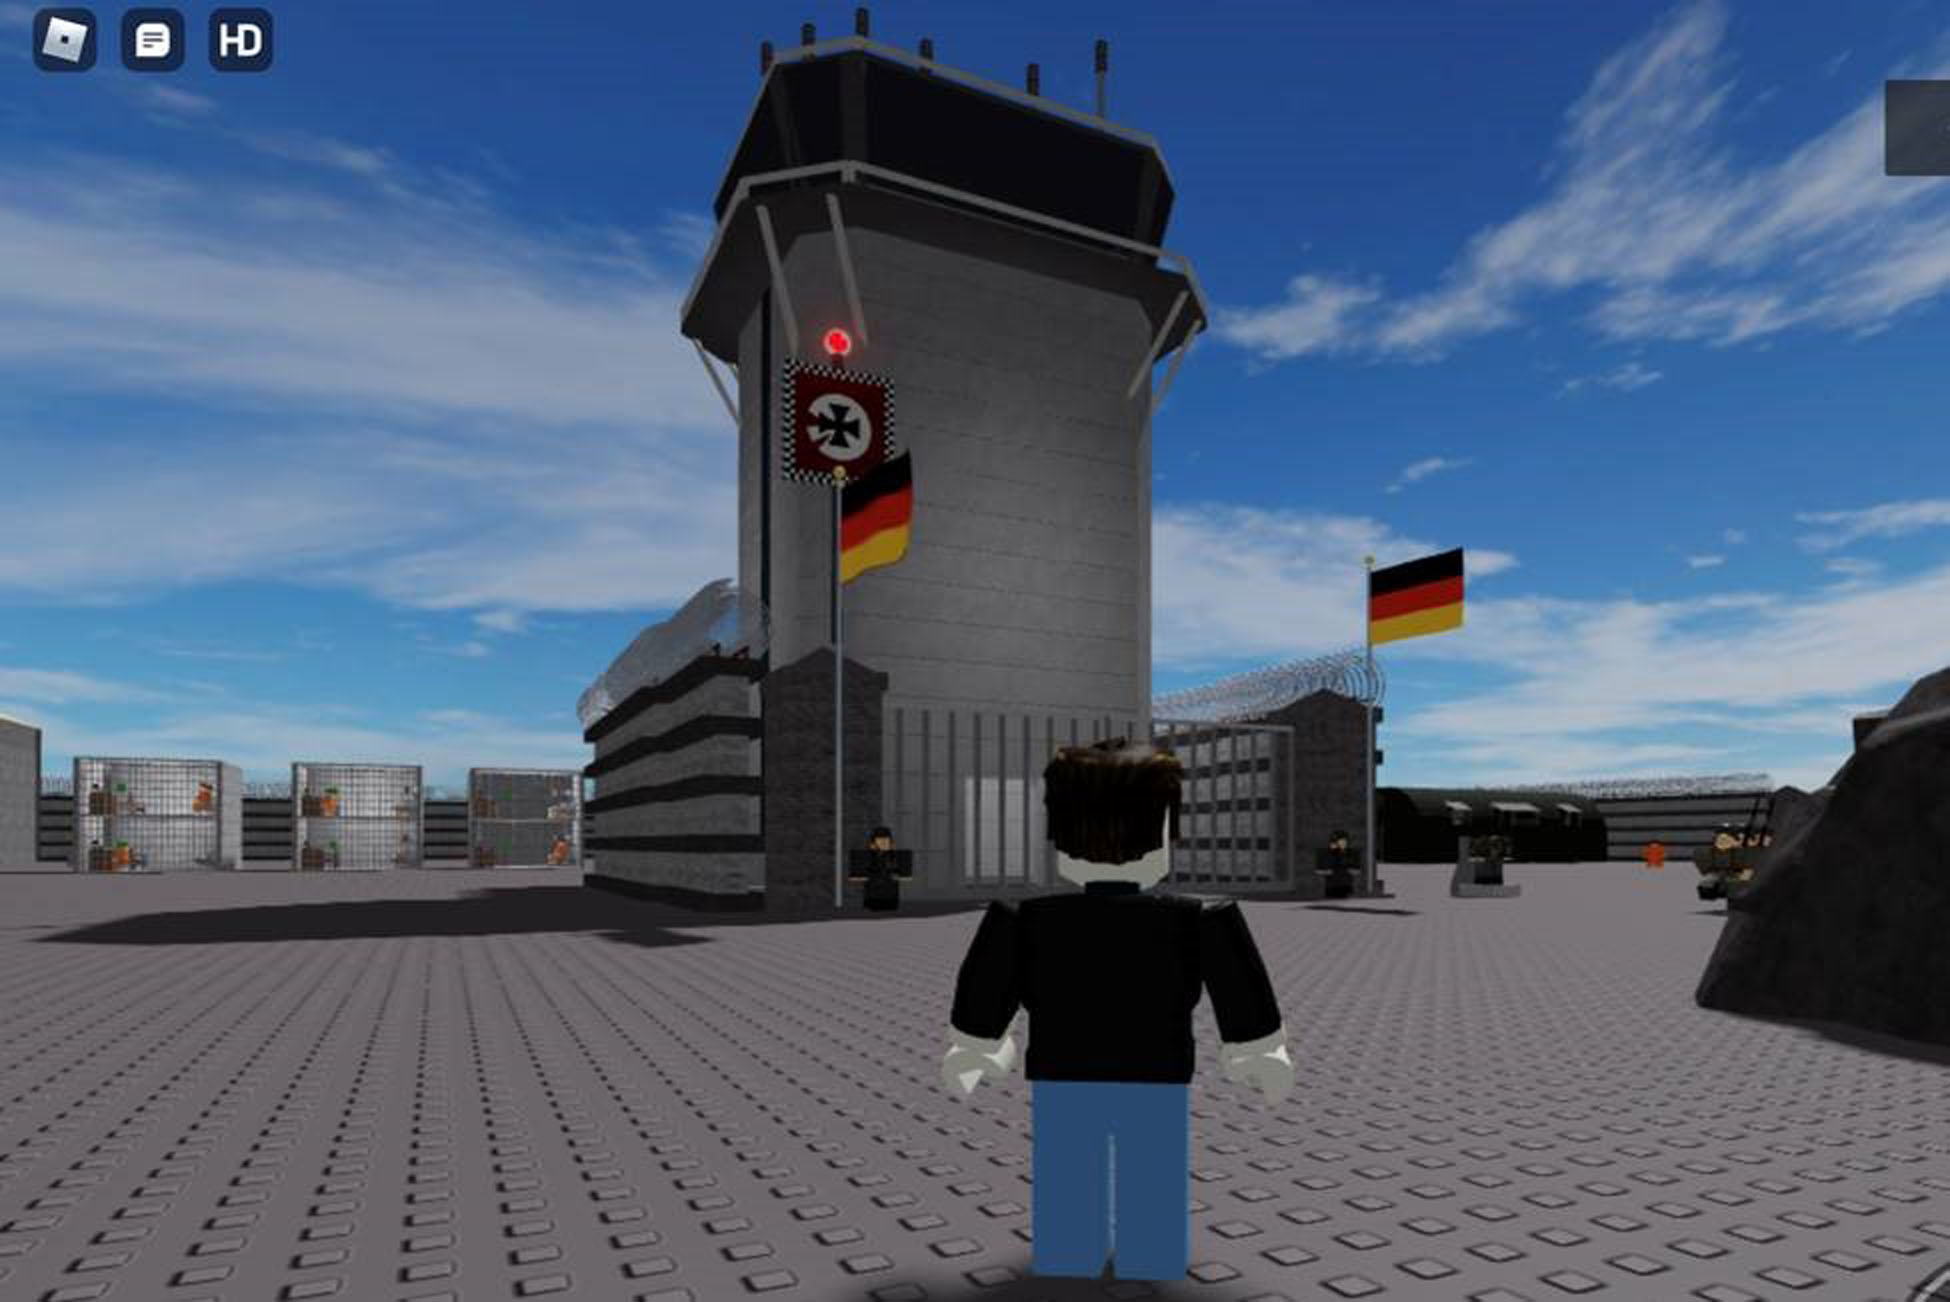 Welp, Roblox Just Removed a Nazi Concentration Camp From Its